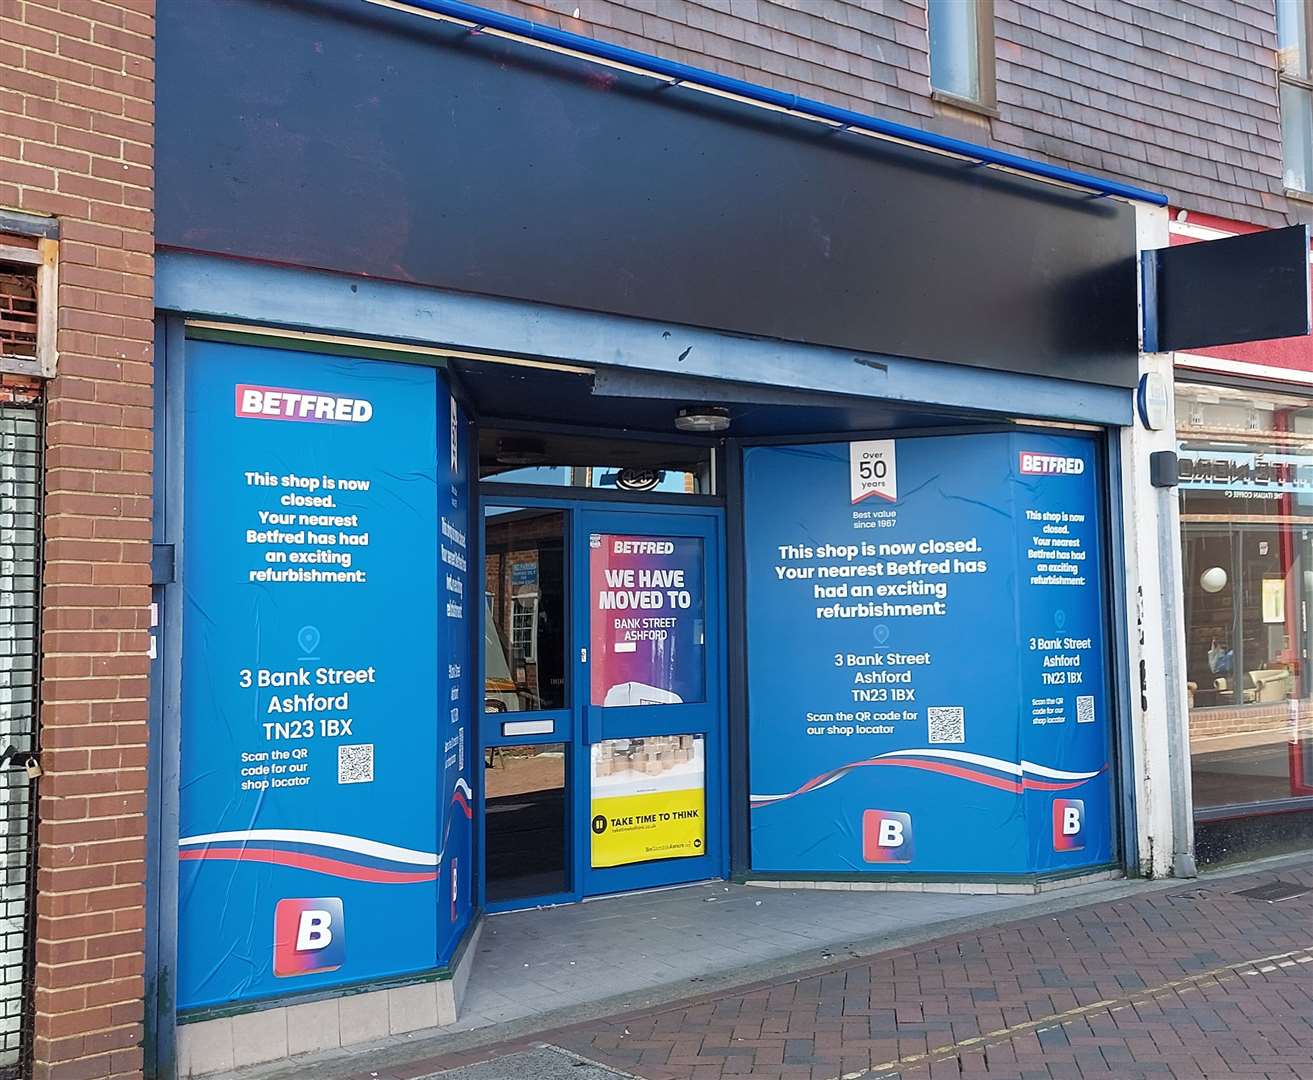 Betfred has become the latest business to leave New Rents